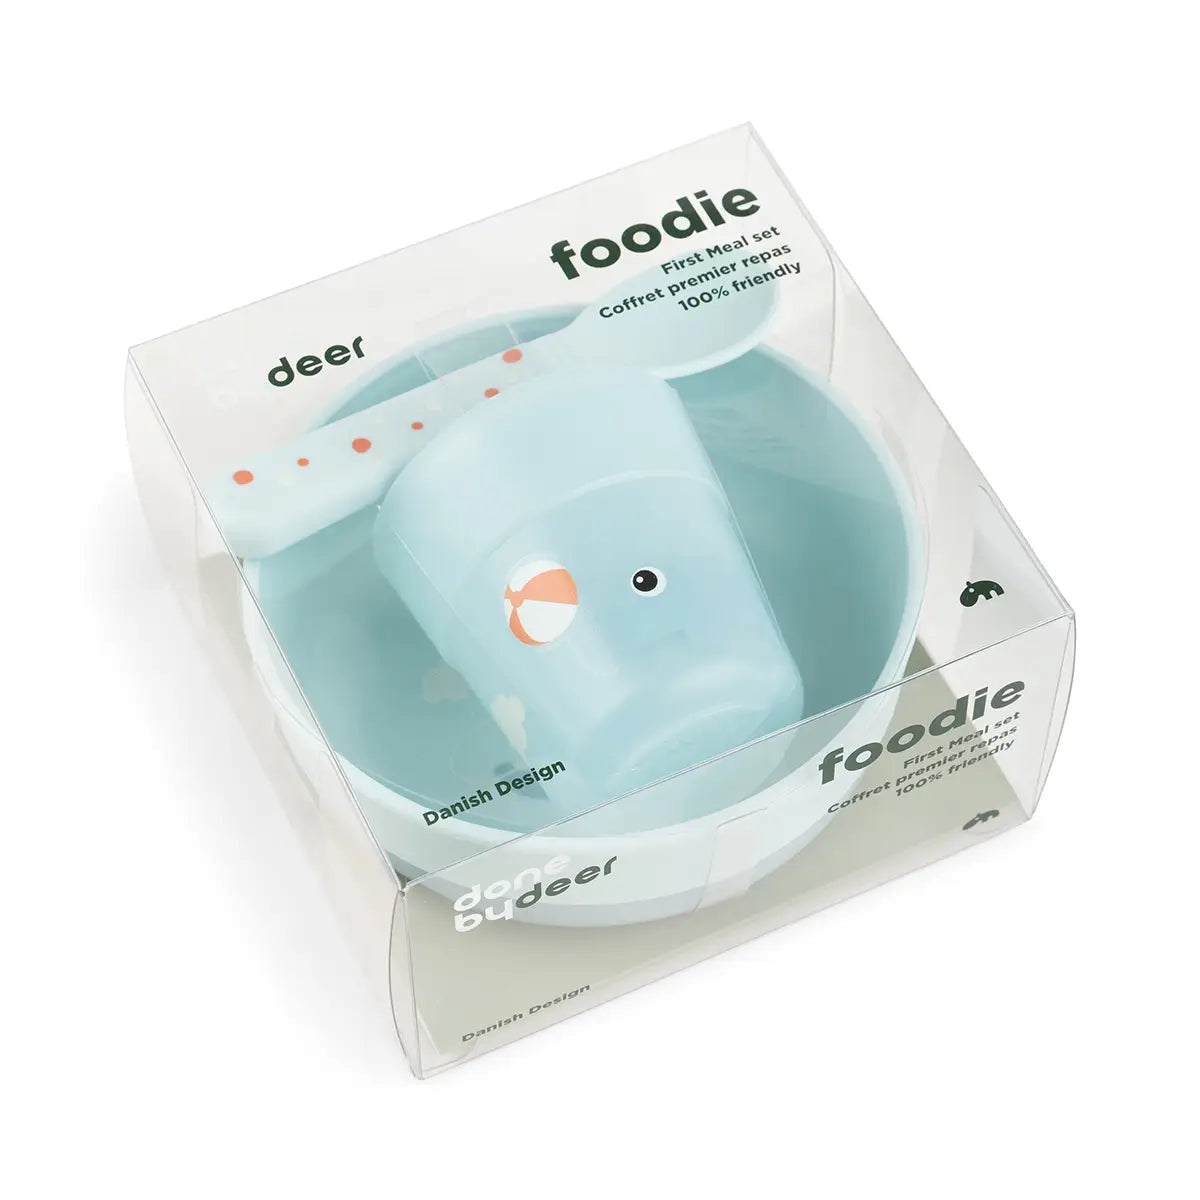 Foodie first meal set - Playground - Blue